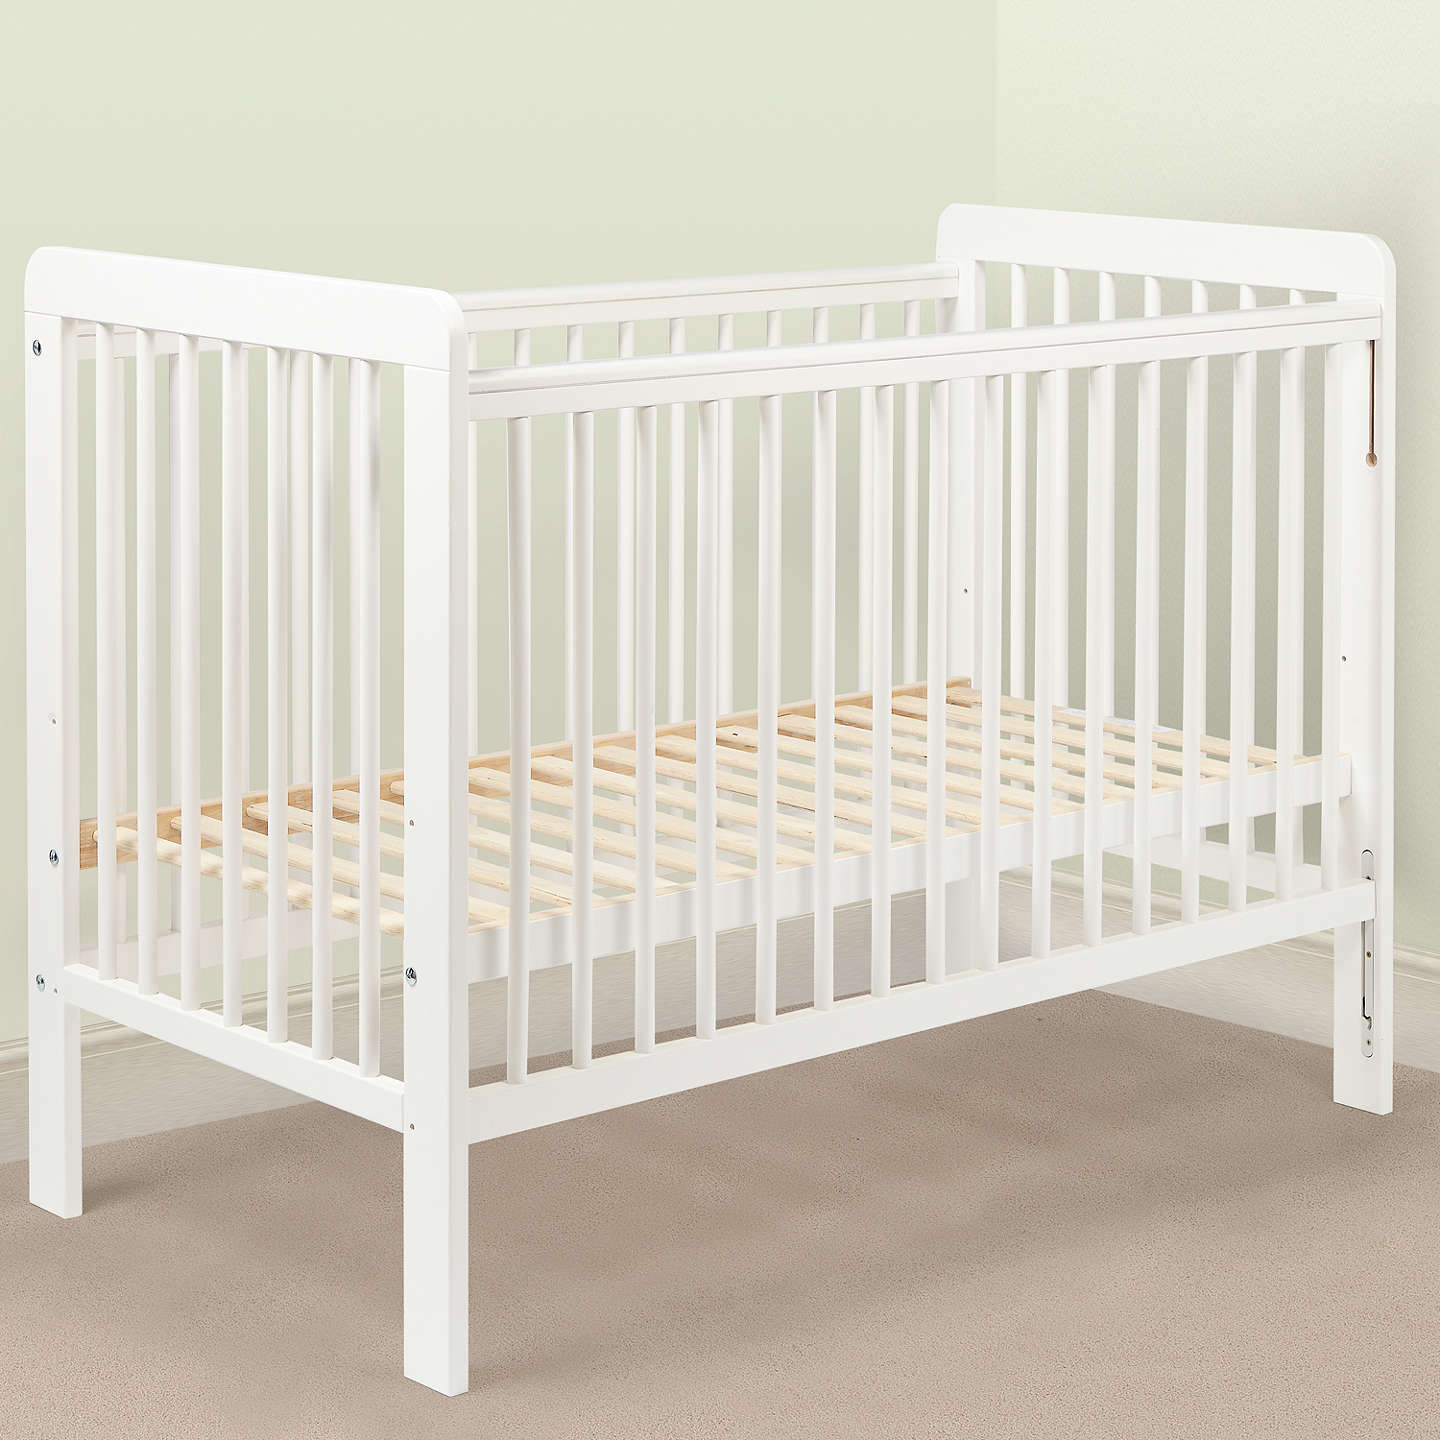 john lewis cot bed instructions